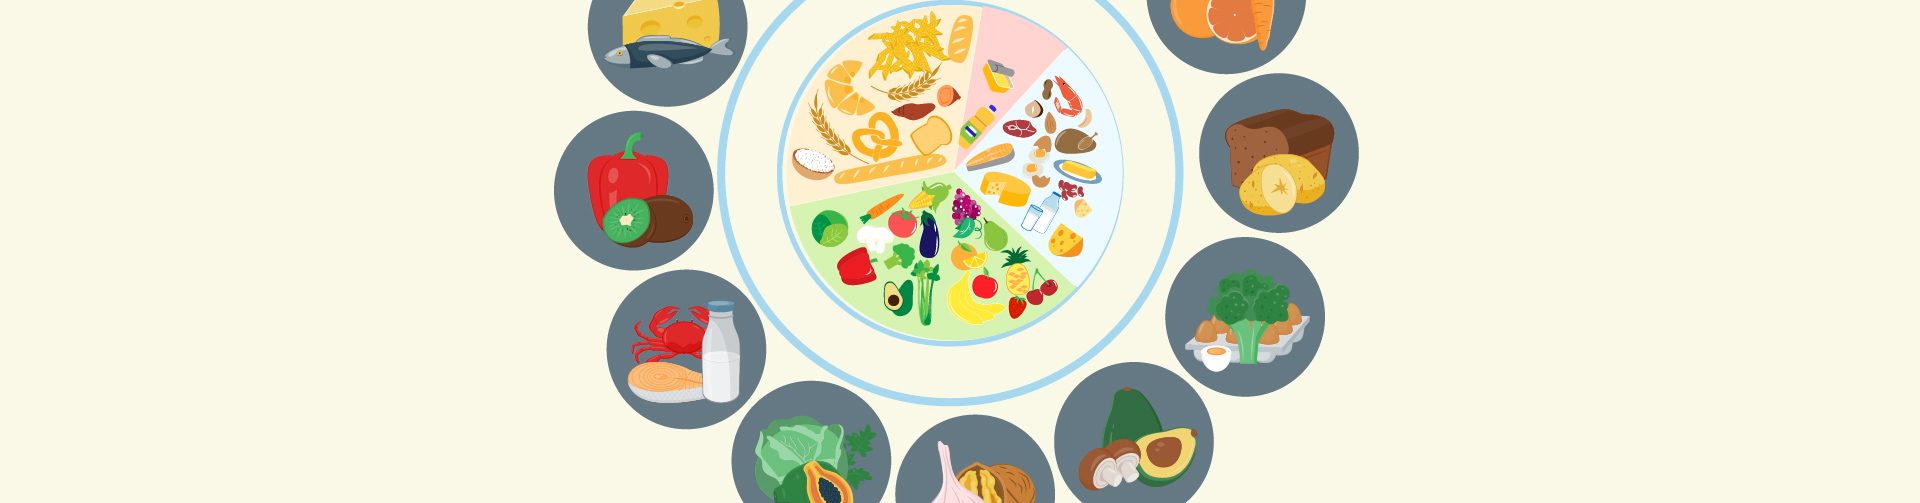 Video: Understanding Food Systems for Healthier Diets